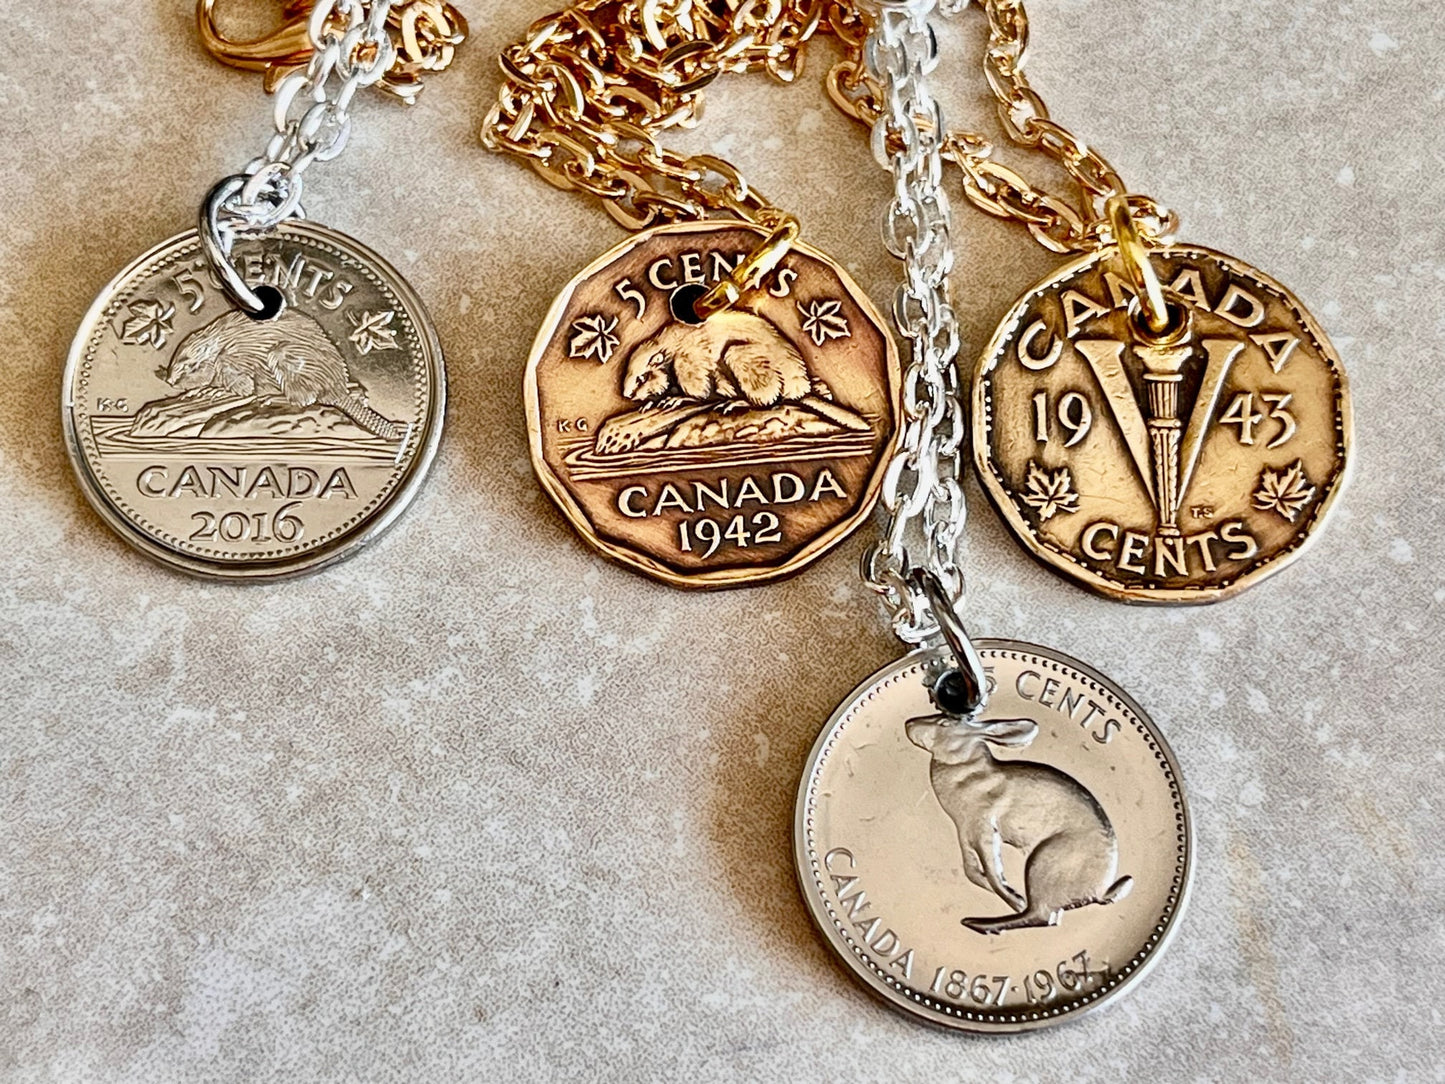 Canada Coin Necklace 5 Cent Nickel Pendant Personal Necklace Old Vintage Handmade Jewelry Gift Friend Charm For Him Her World Coin Collector